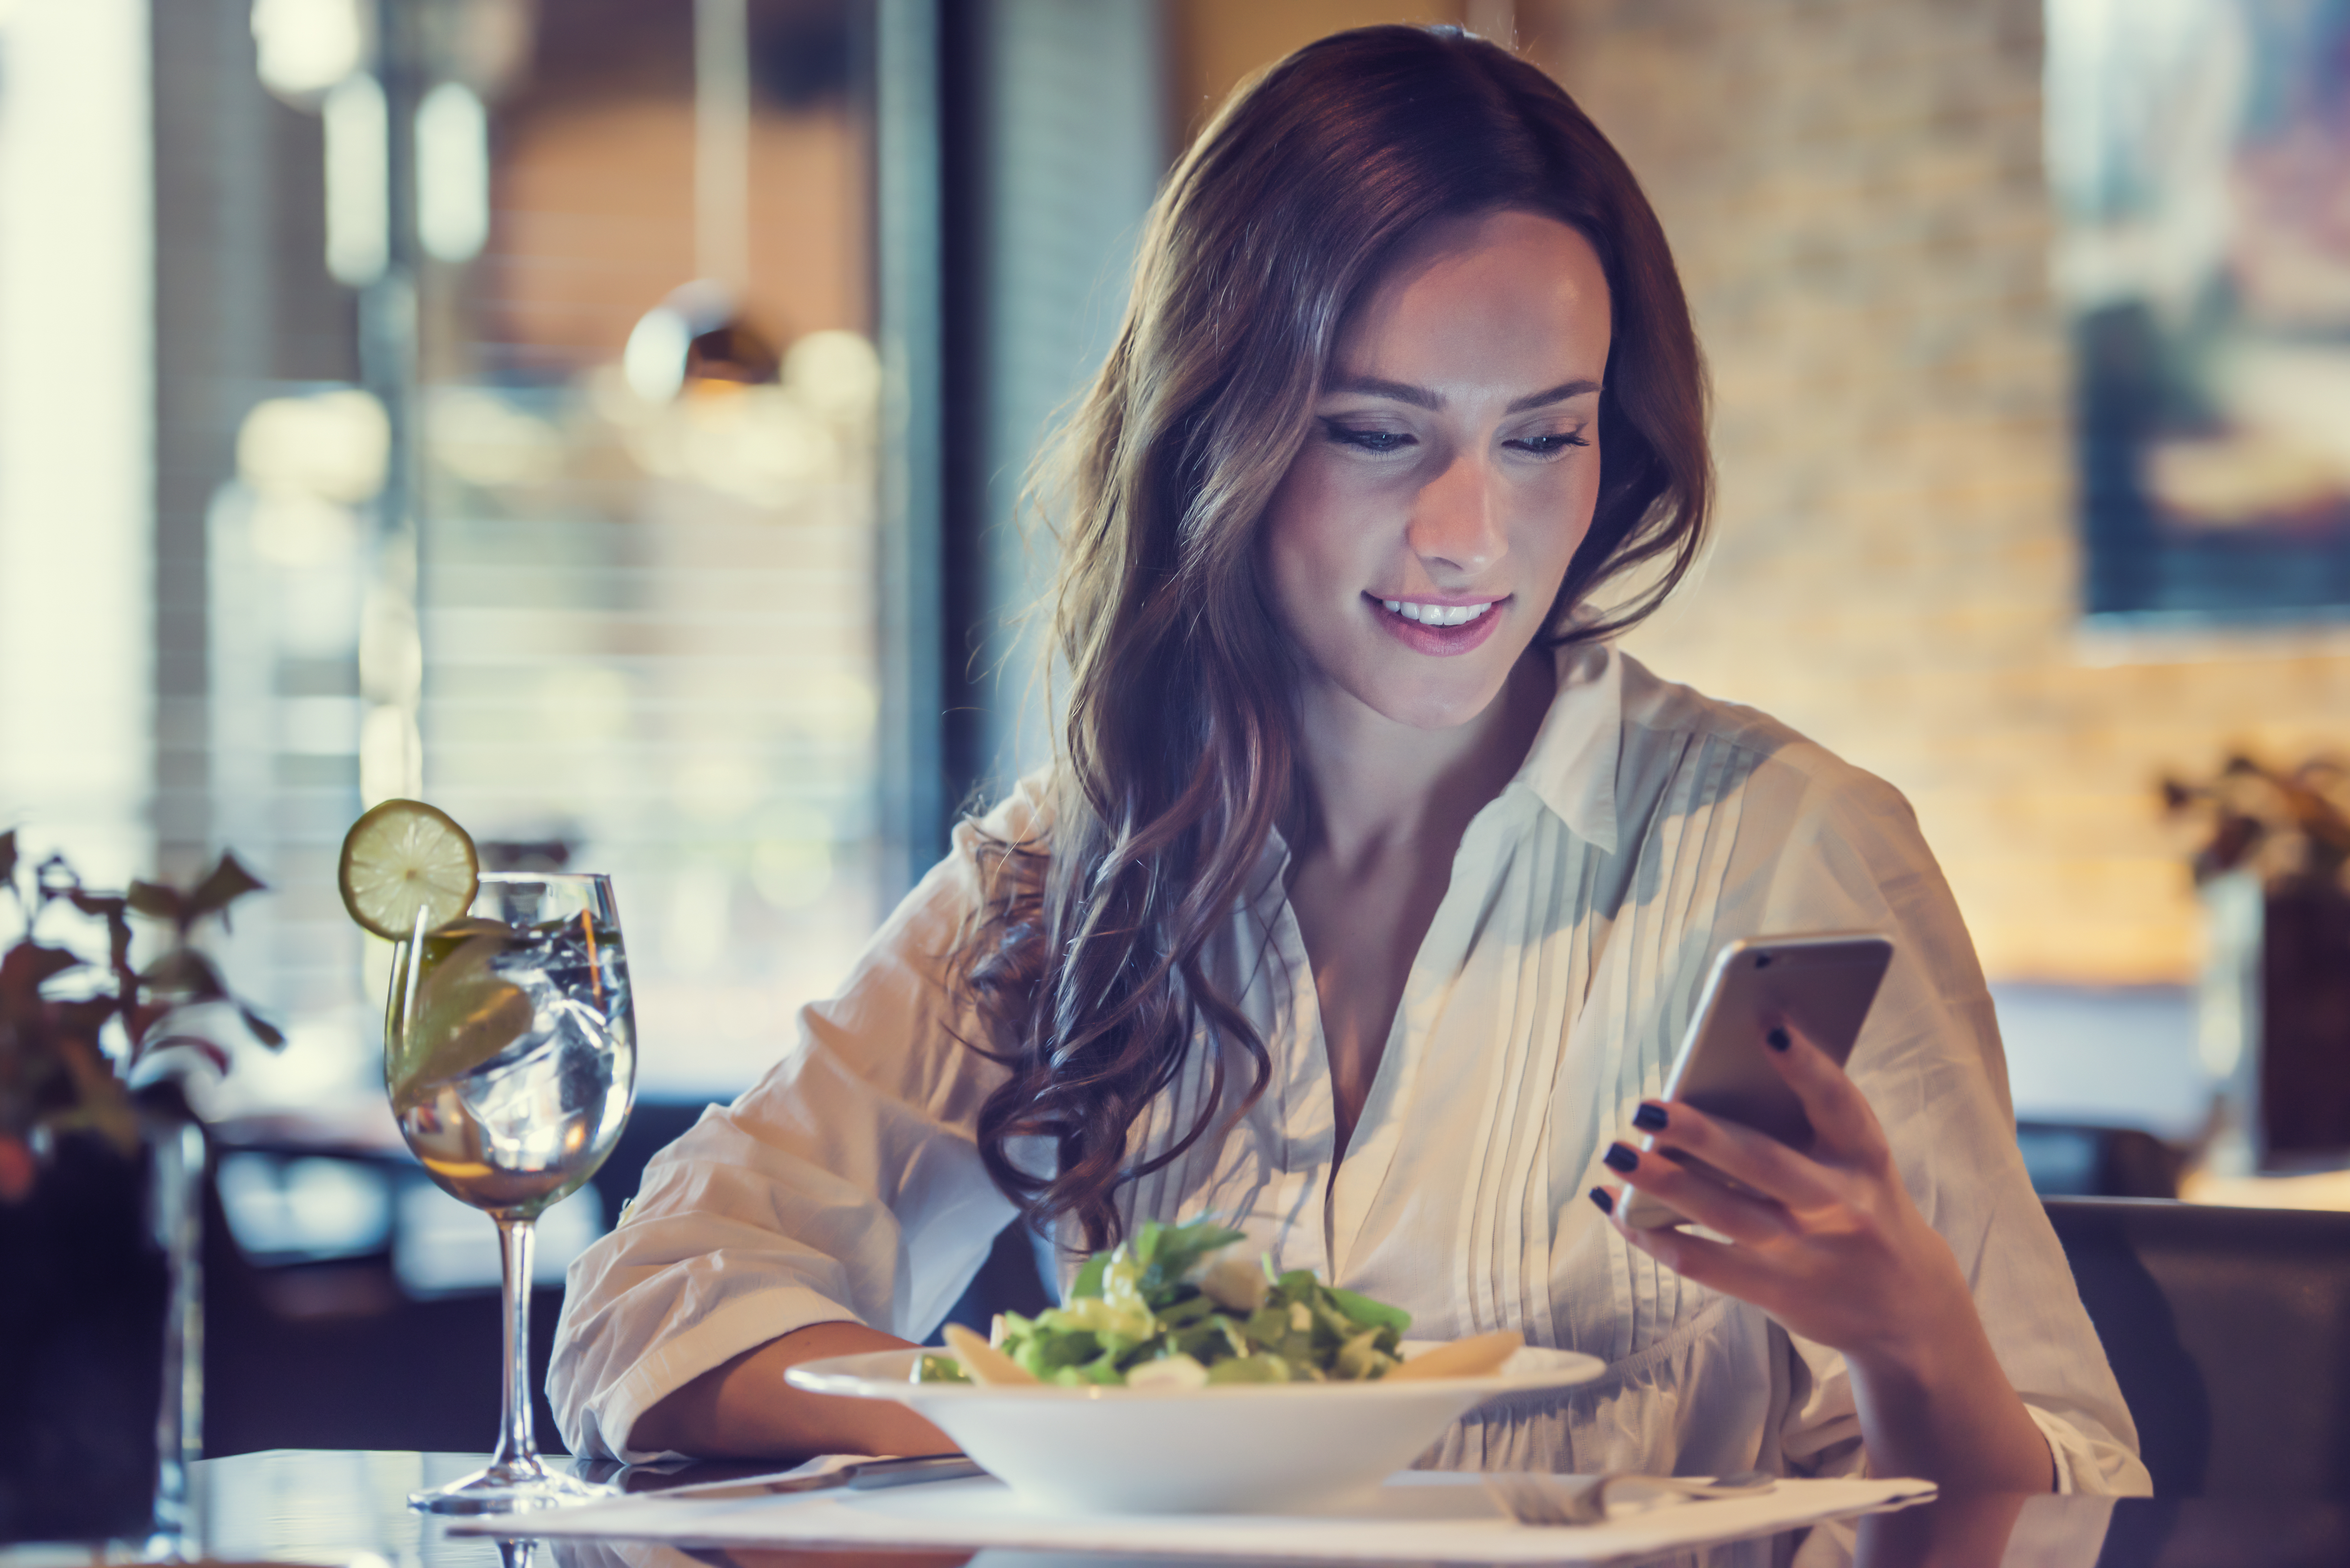 A young woman using her phone in a restaurant | Source: Shutterstock